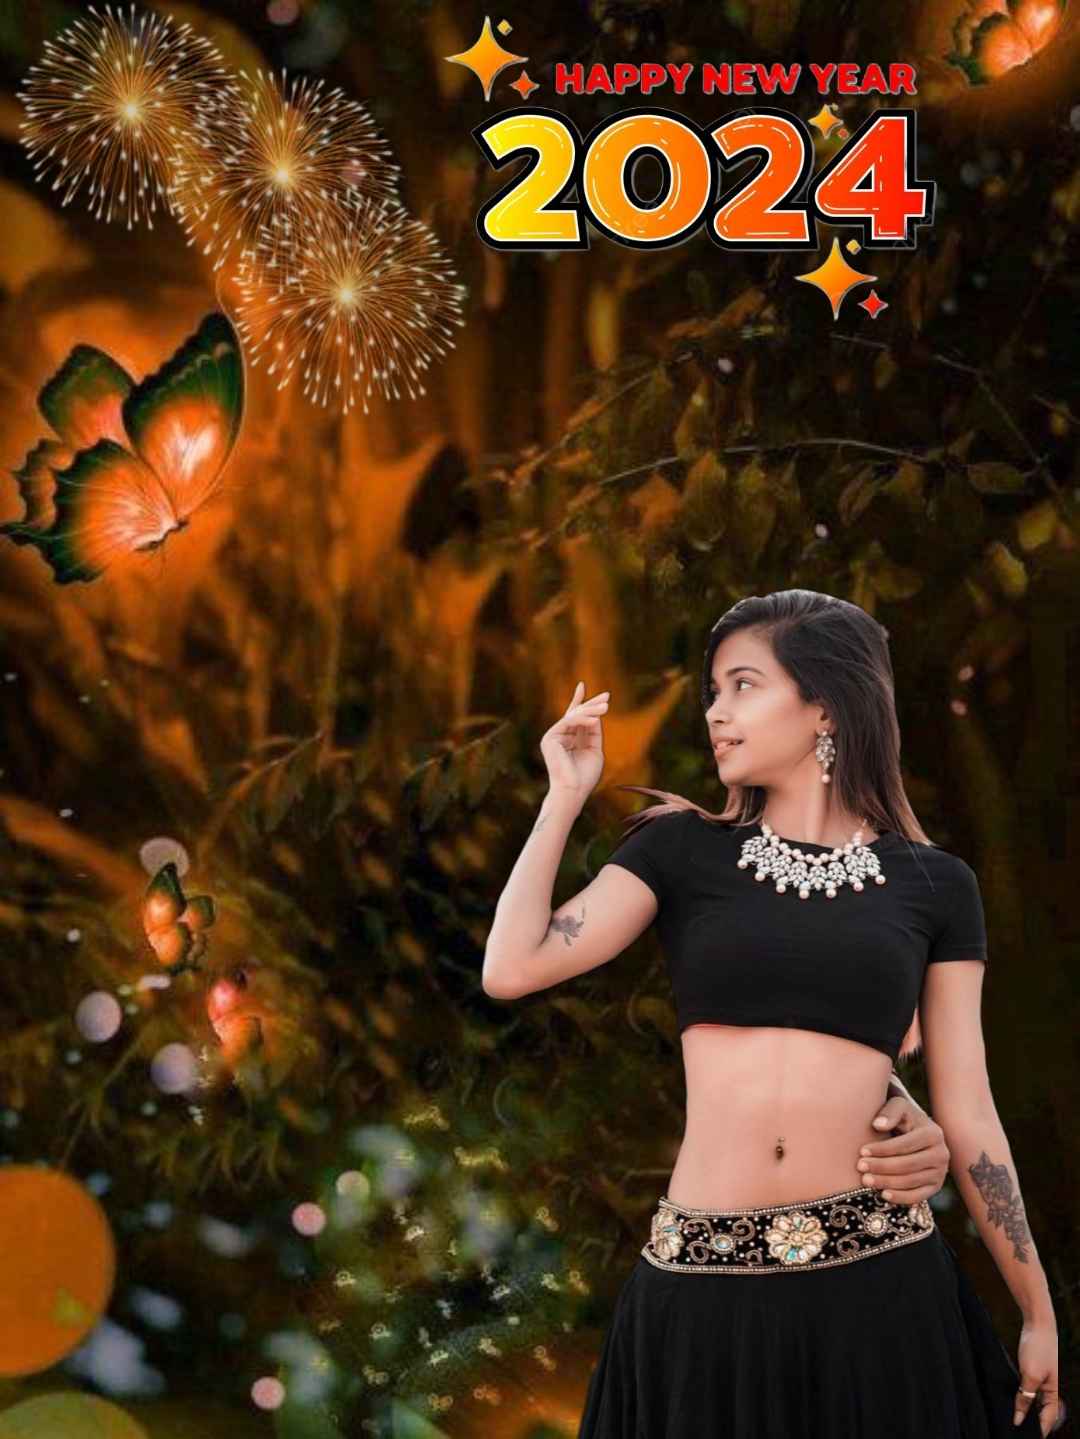 New Year 2024 Girl CB Background HD 4K Image